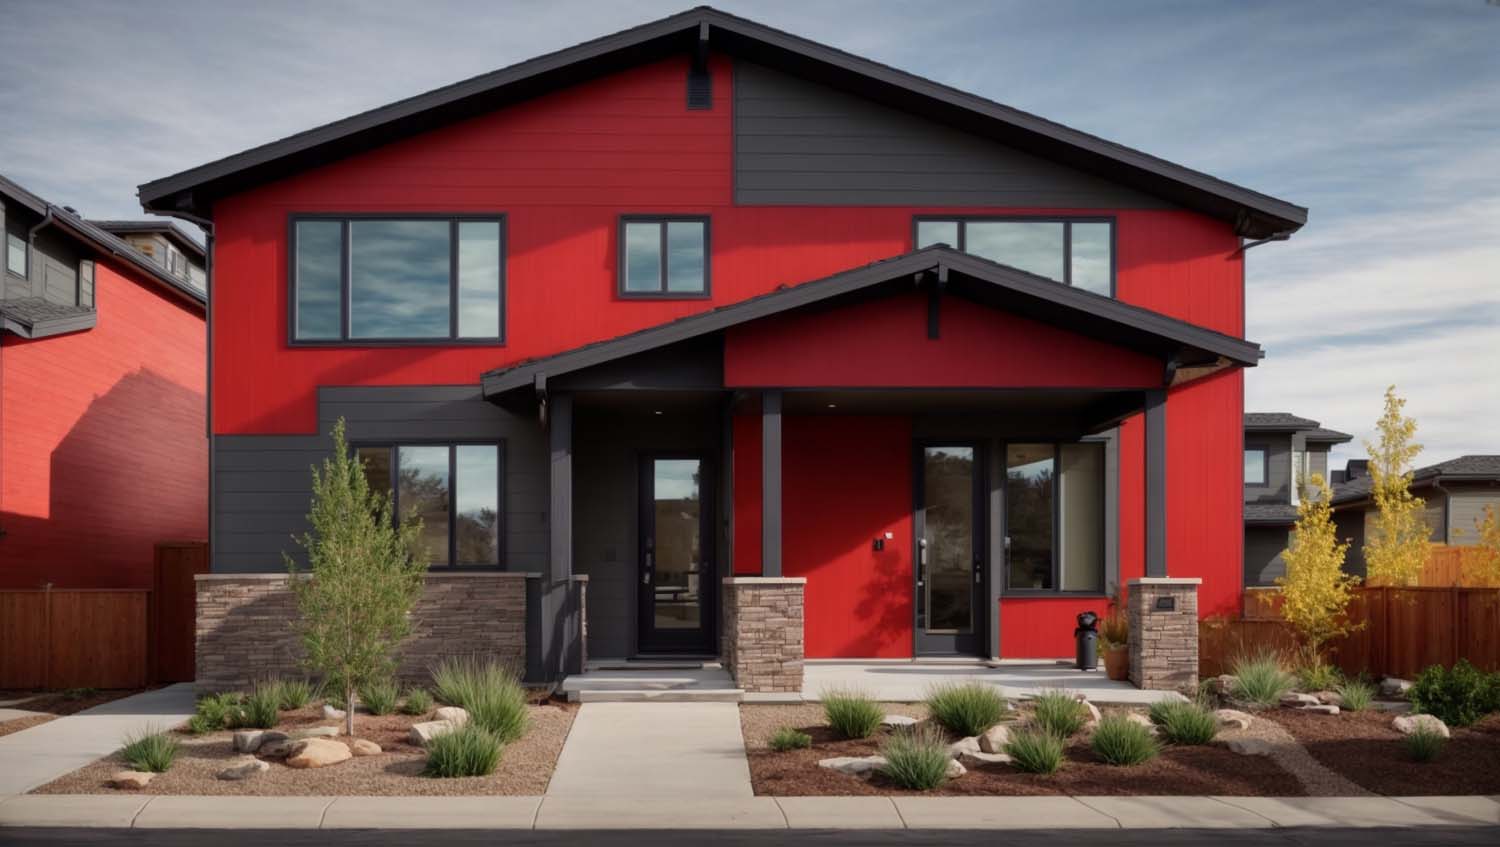 Catering to Colorado’s rural demand, Boulder excels in shingle siding.